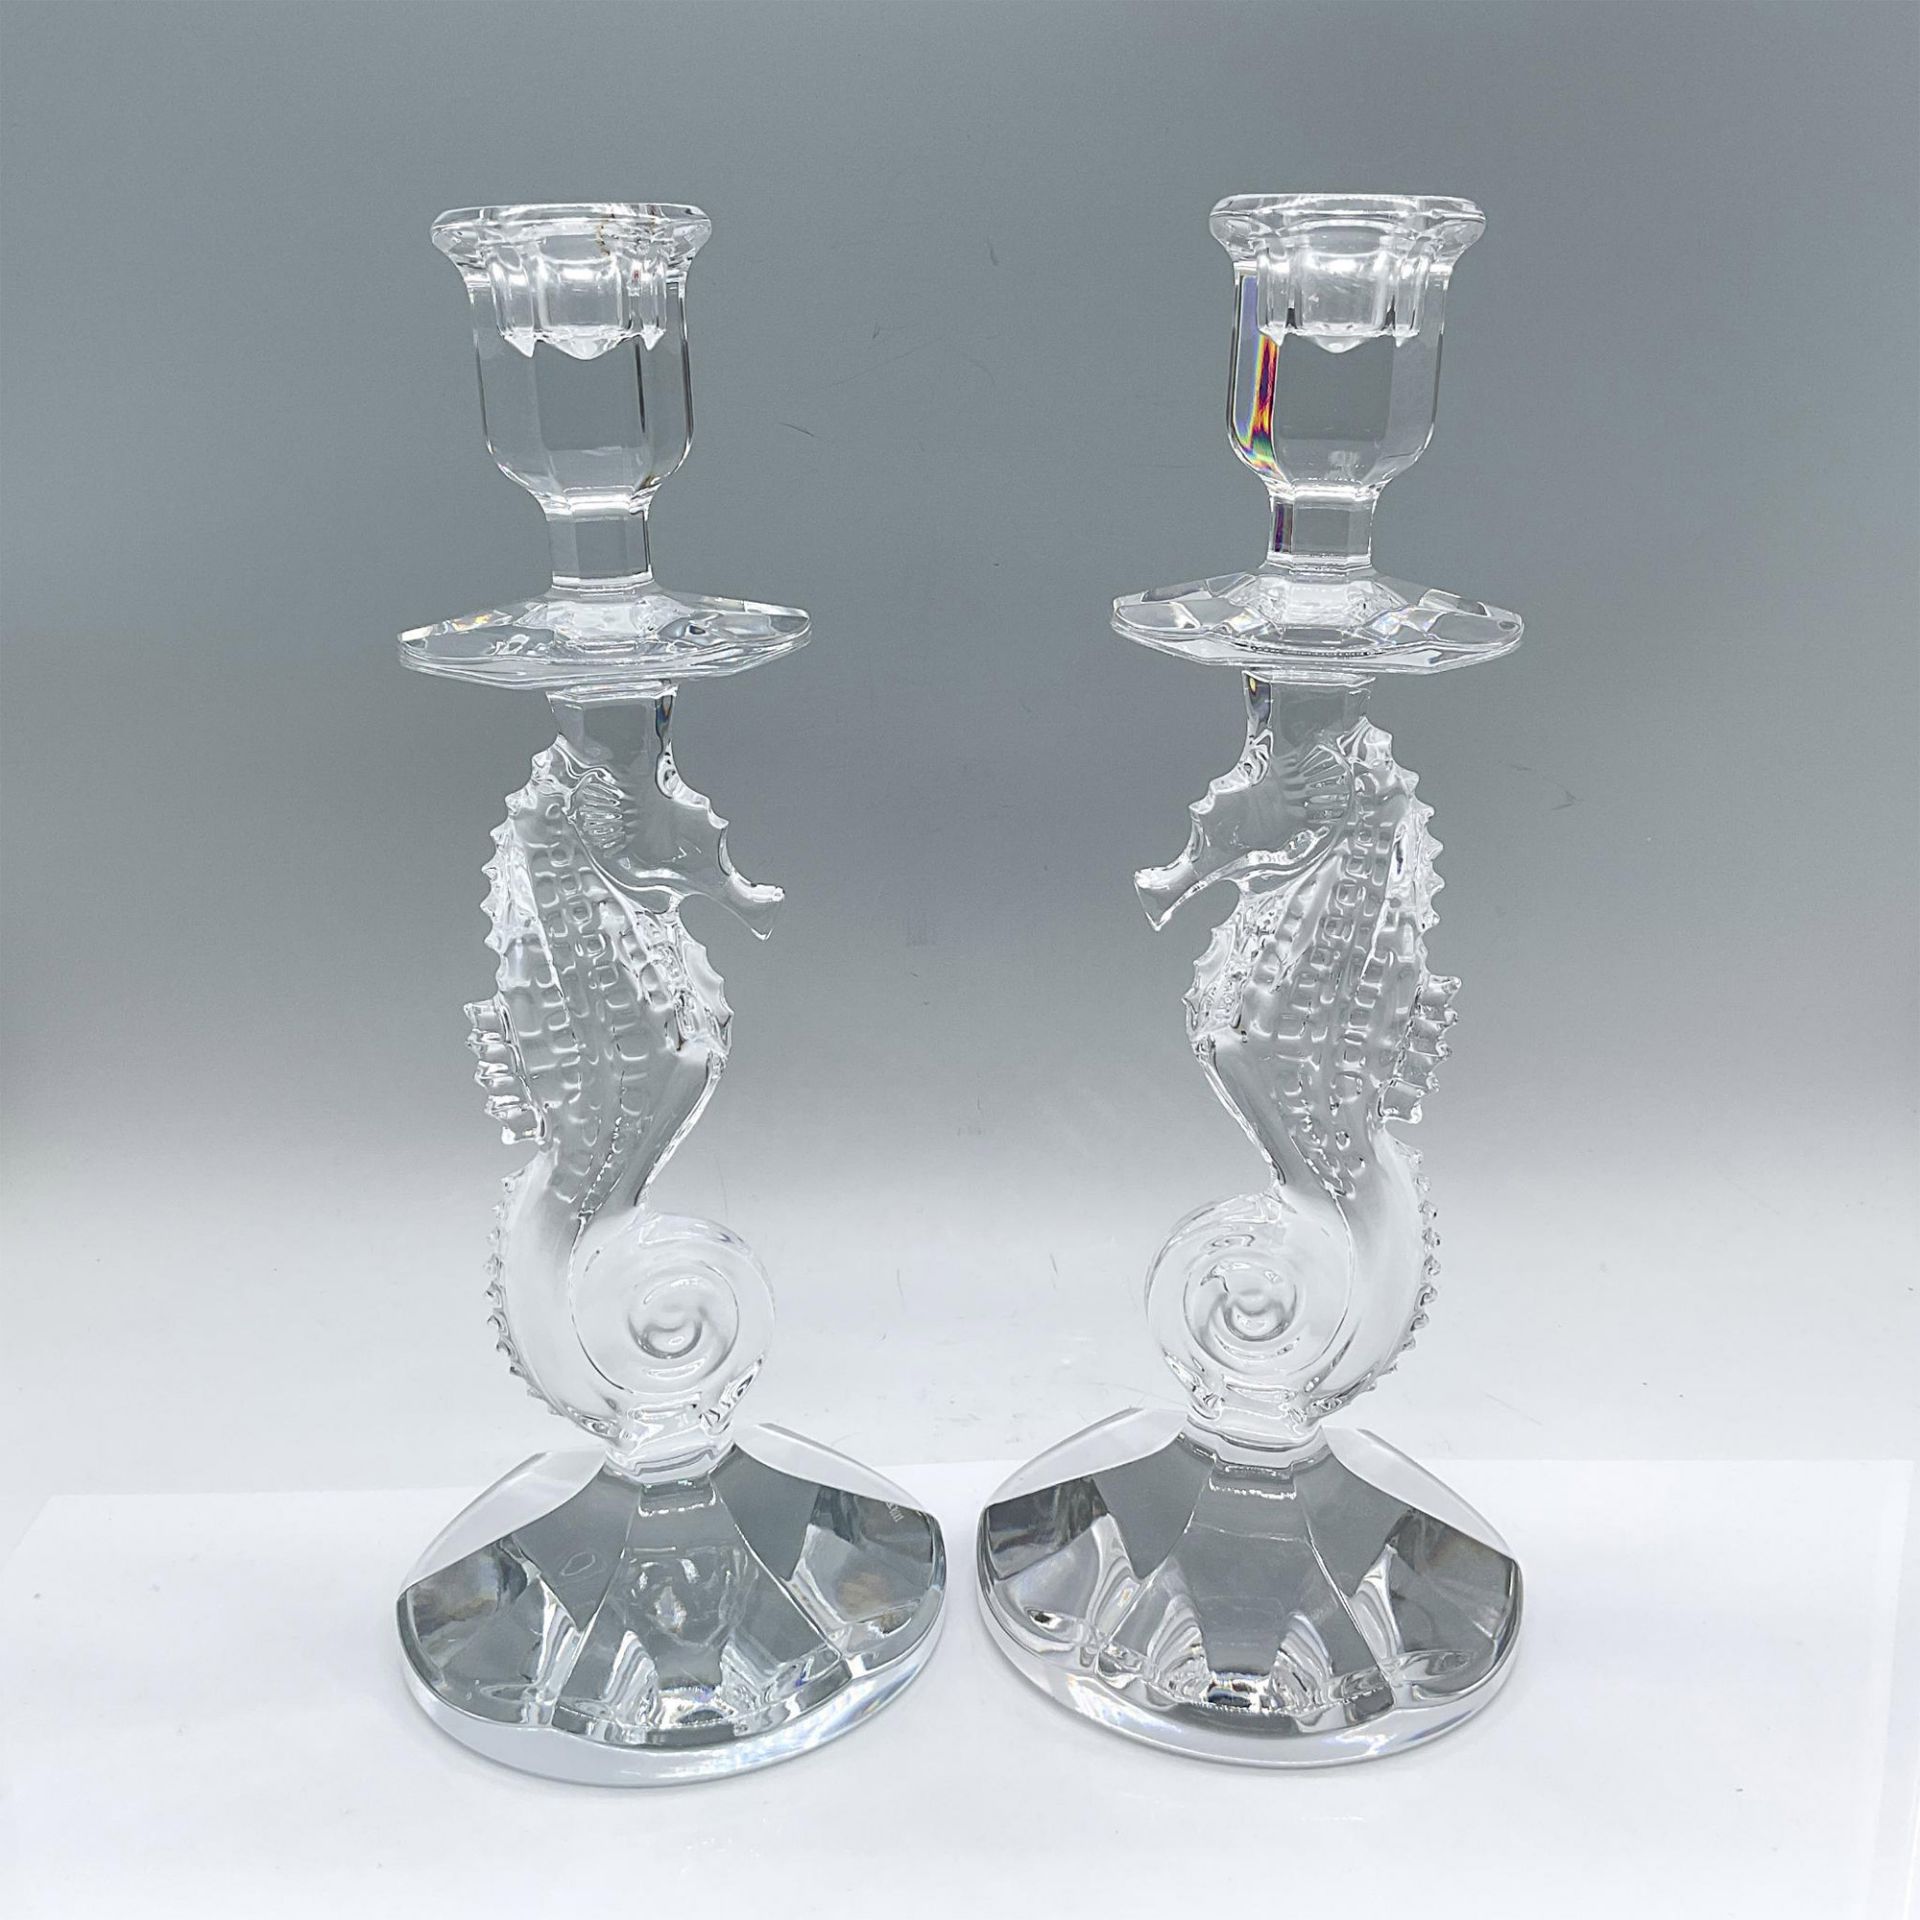 Pair of Waterford Crystal Candlesticks, Seahorse